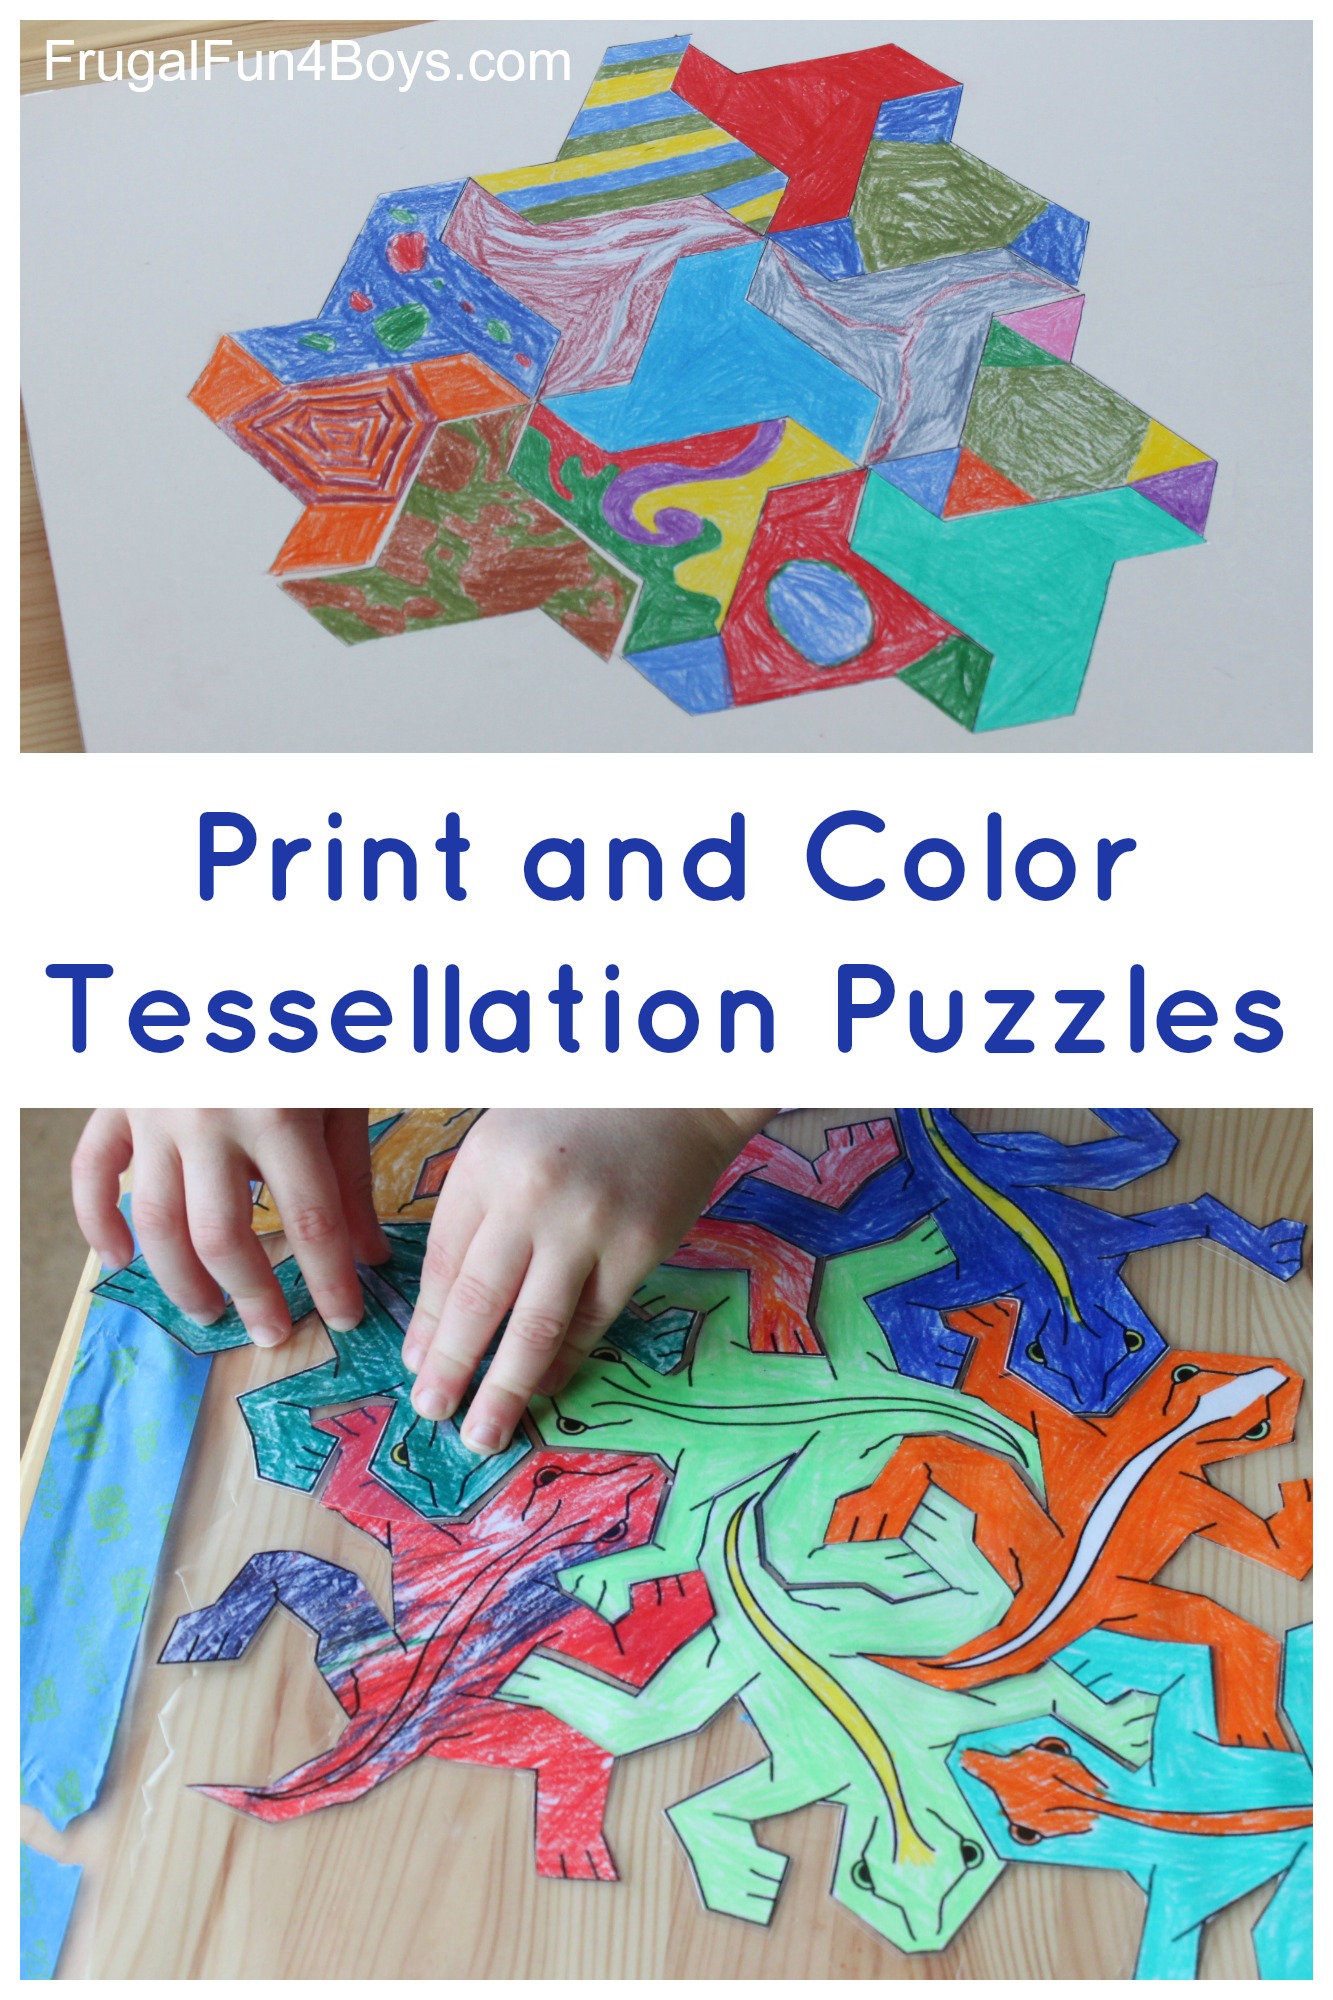 Print and color tessellation puzzles for kids